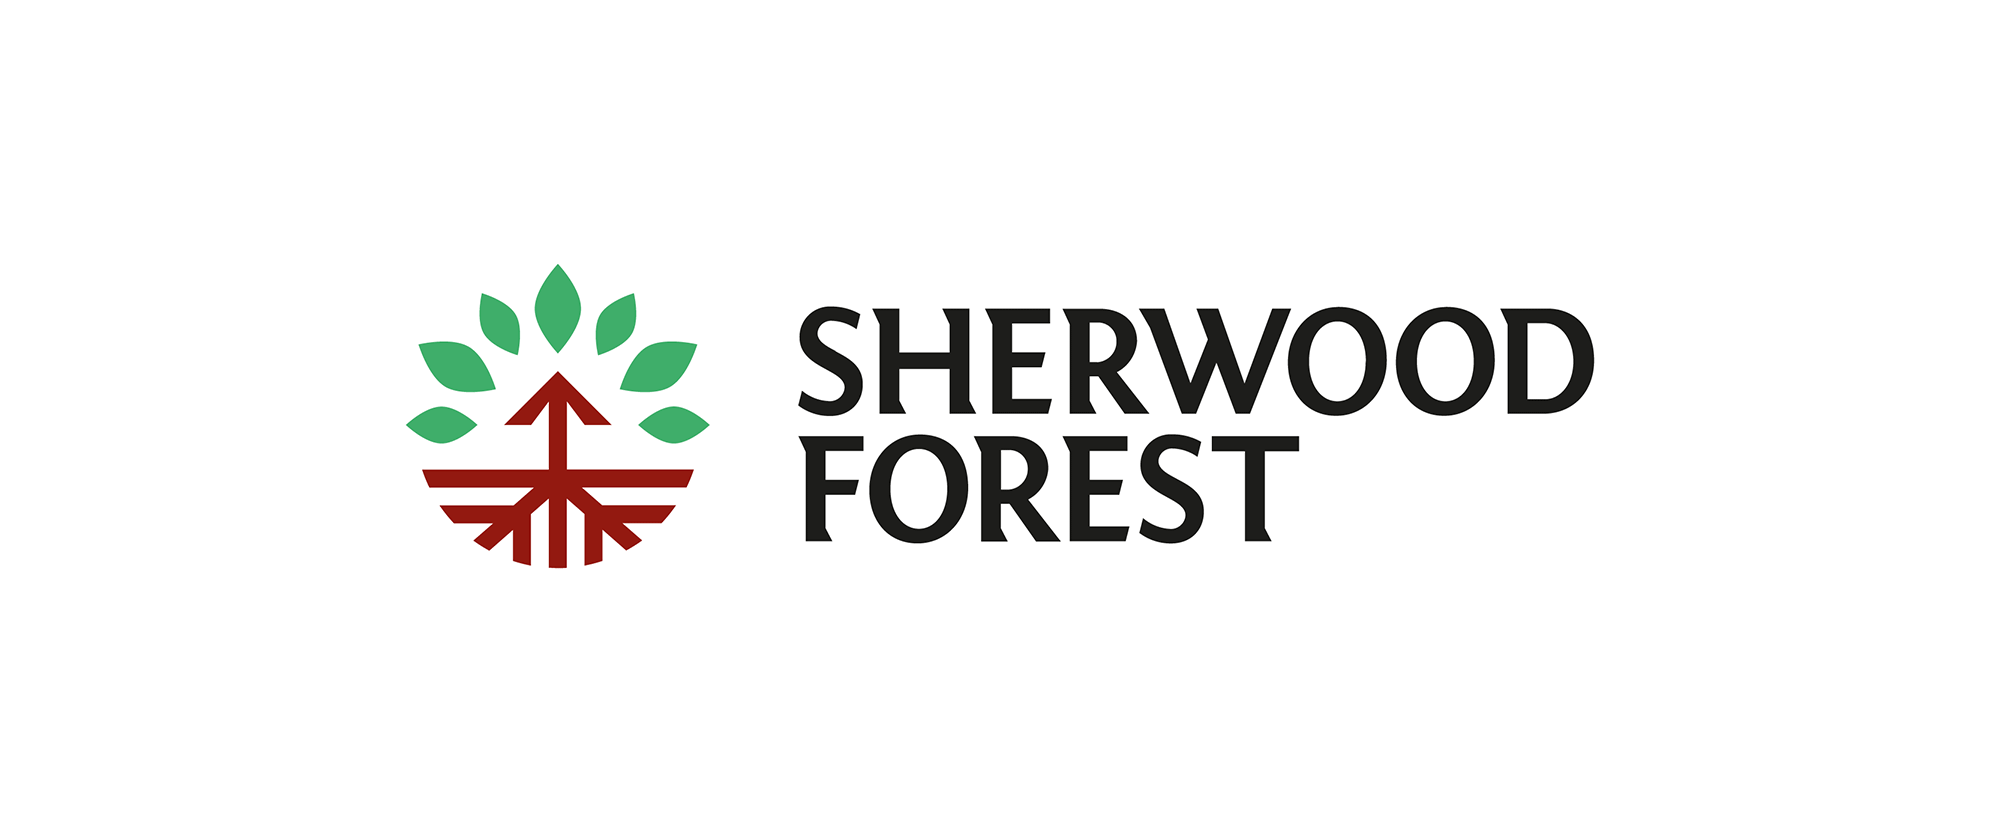 New Logo and Identity for Sherwood Forest by Cafeteria